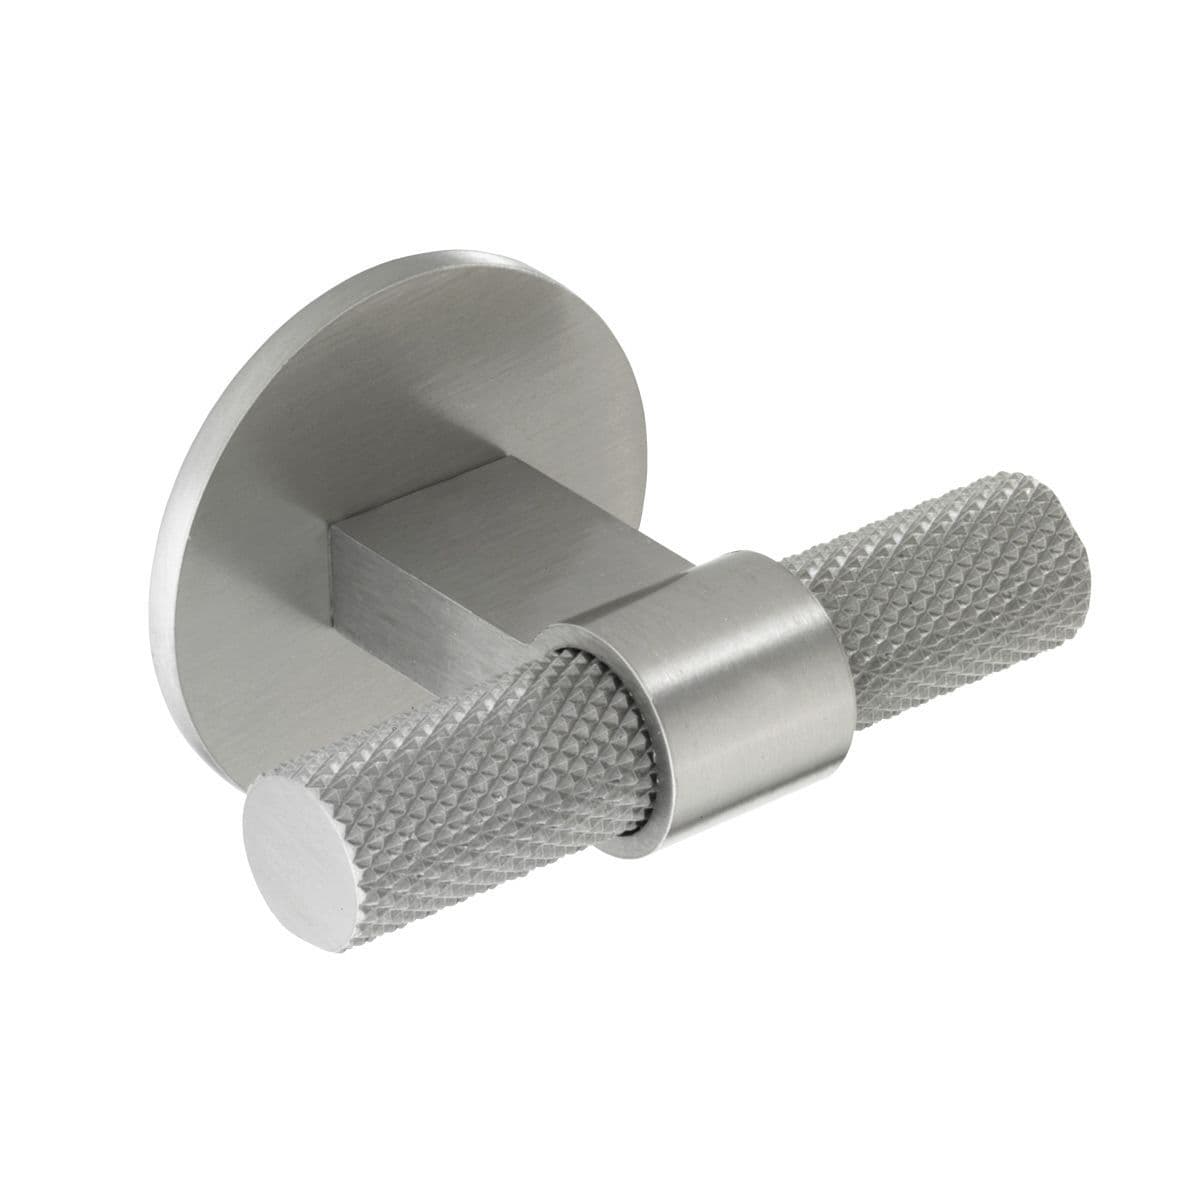 KNURLED T KNOB c/w CIRCULAR BACKPLATE Cupboard Handle - 60mm long - 3 finishes (PWS H1125.35)